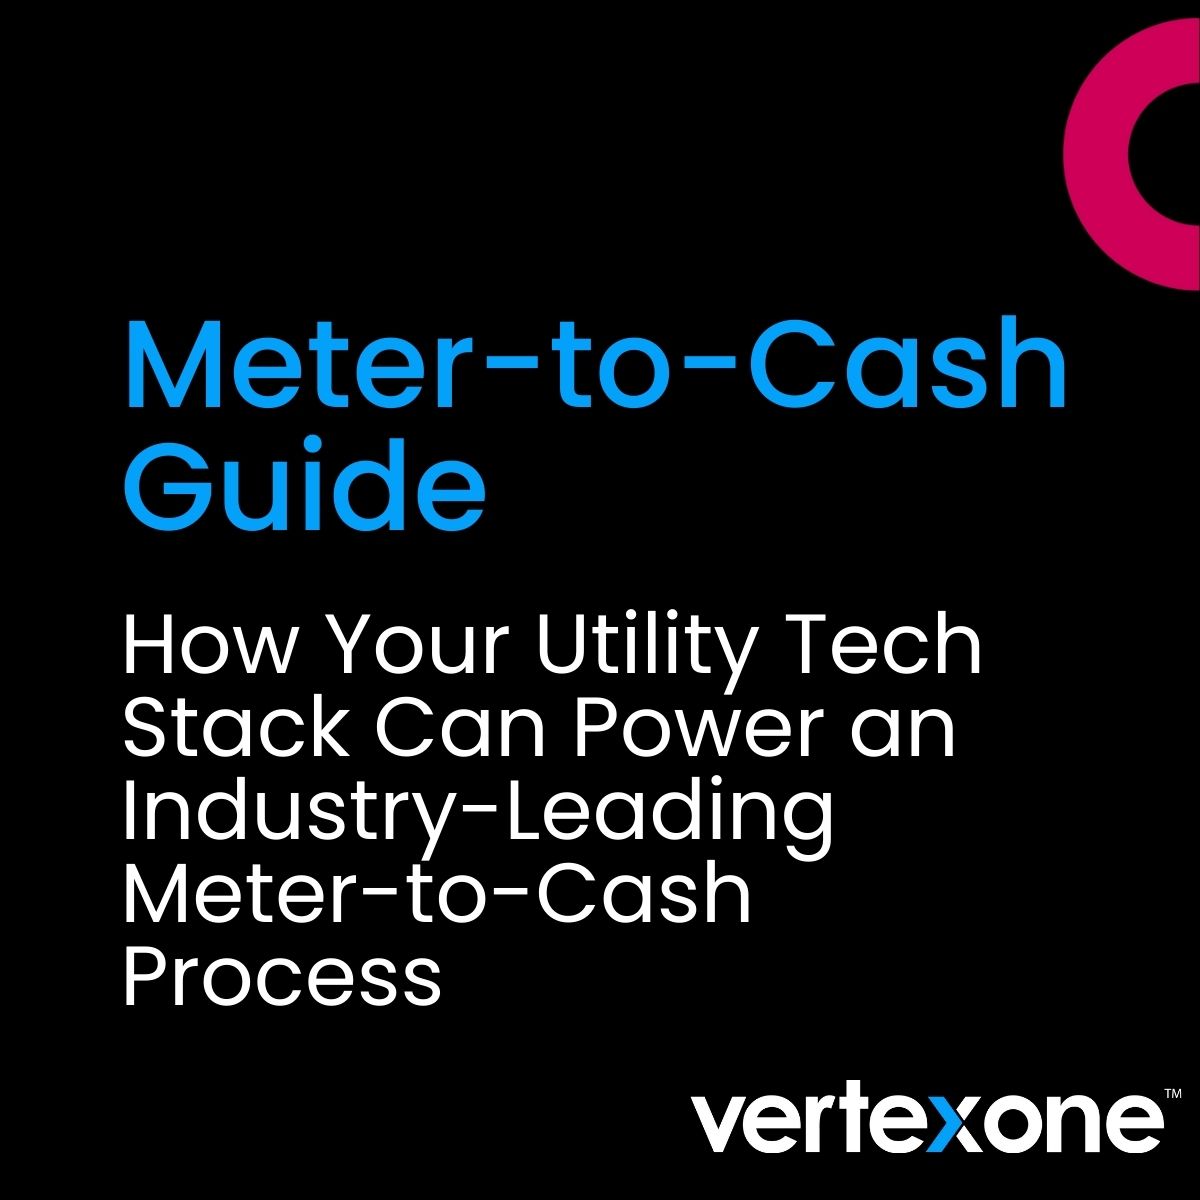 Meter-to-Cash Guide: How Your Utility Tech Stack Can Power an Industry-Leading Meter-to-Cash Process